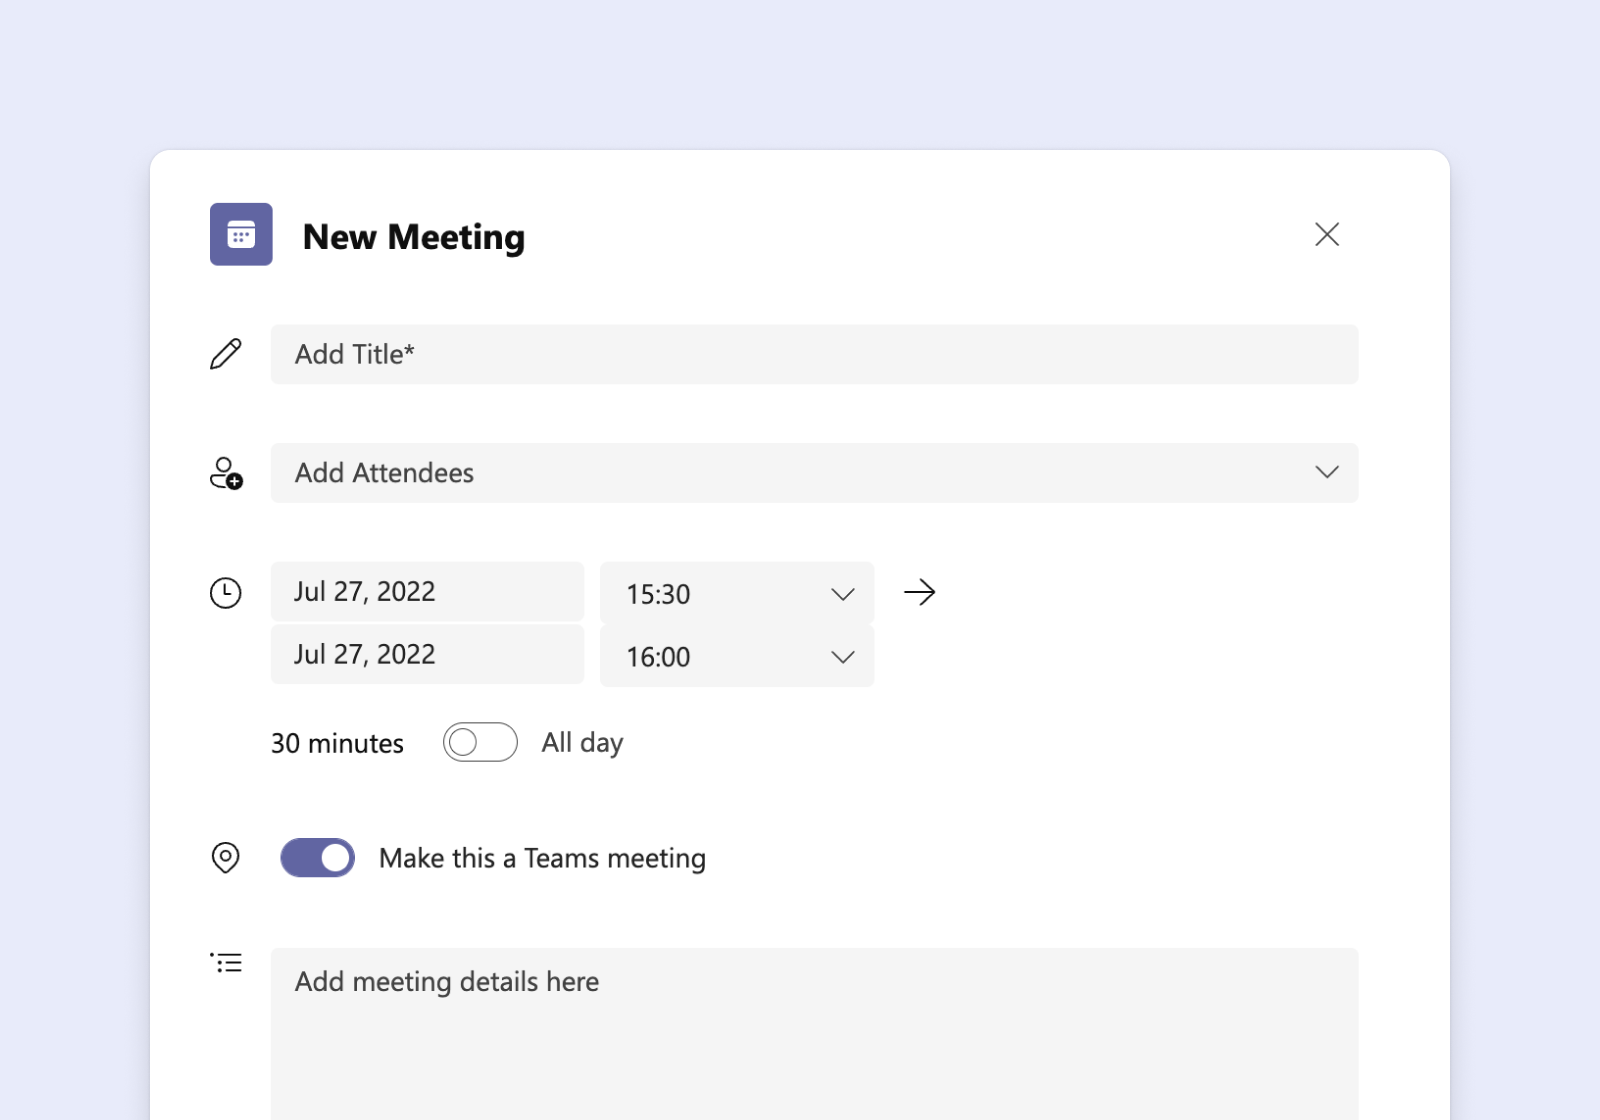 Control experience when creating an internal meeting